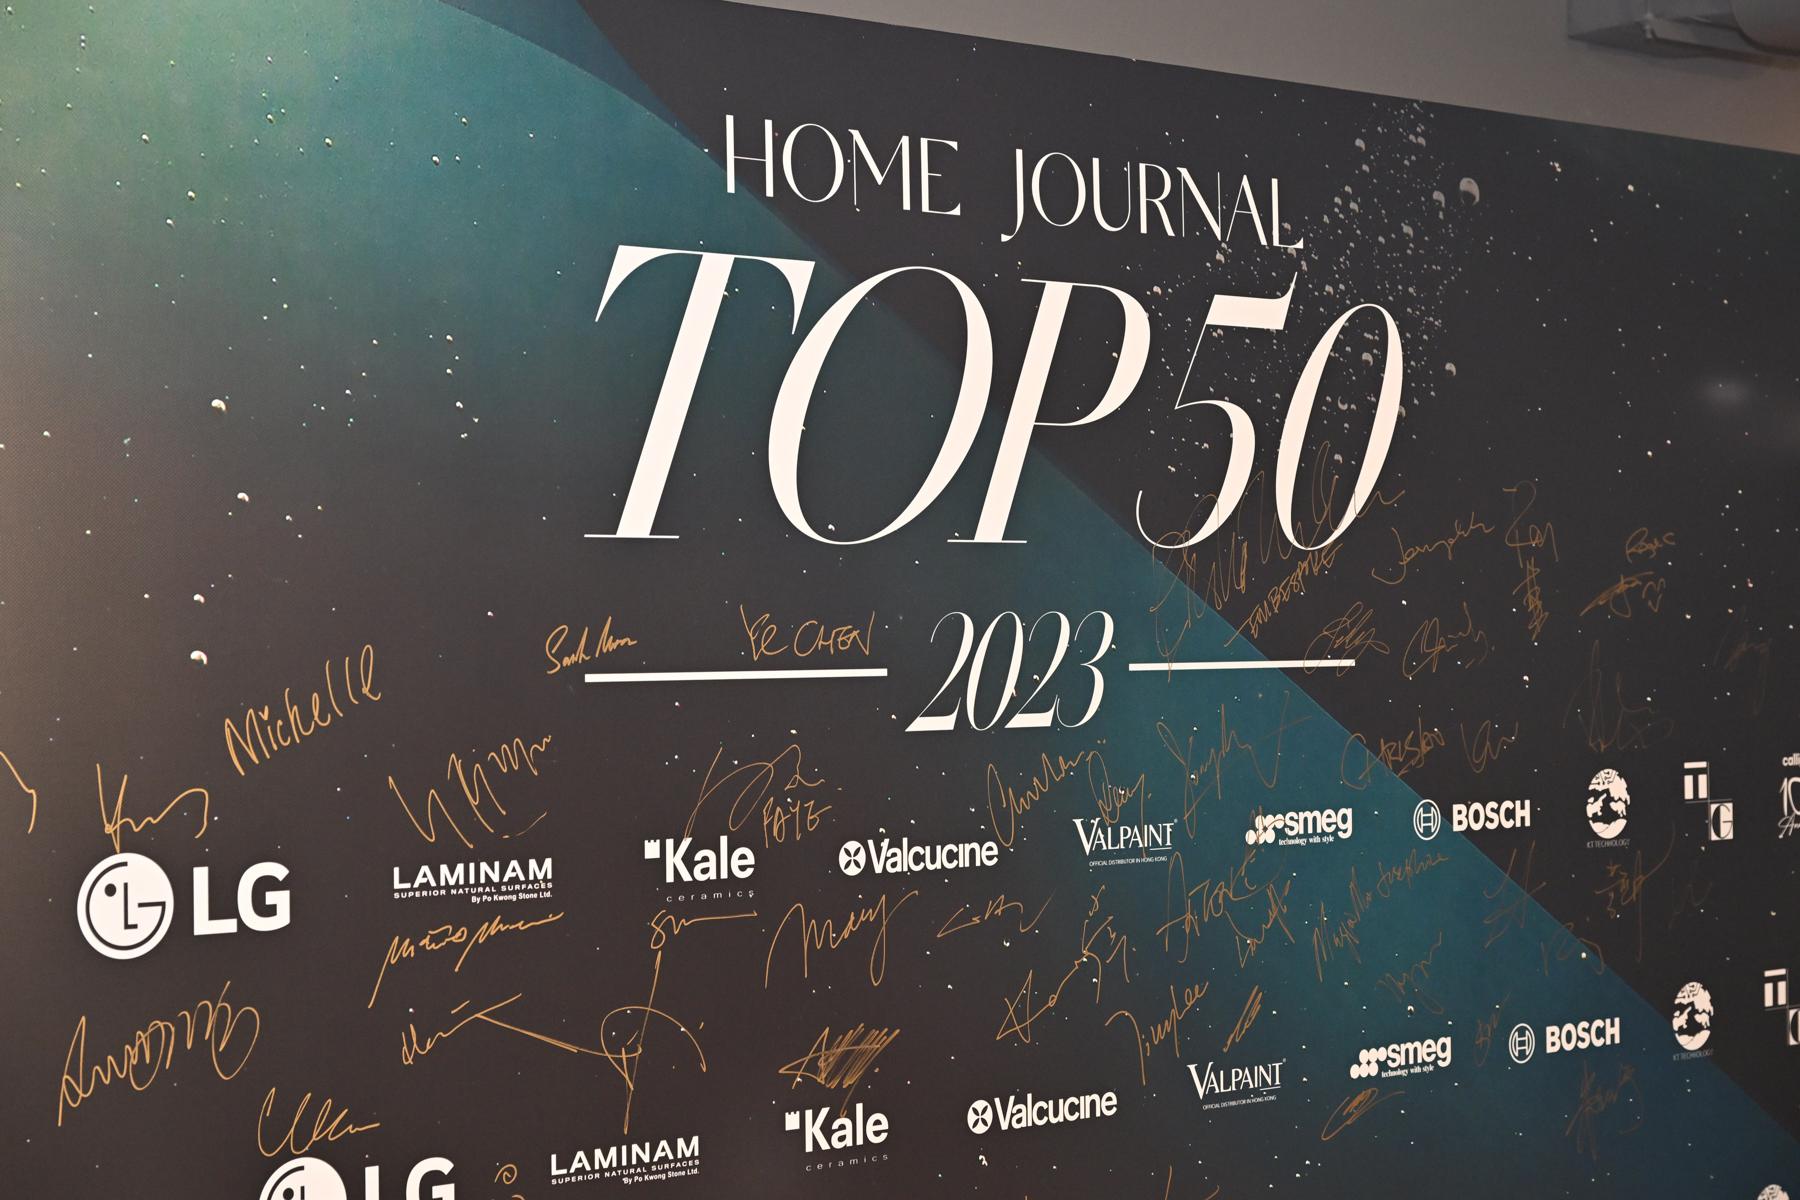 Home Journal Top 50 Cocktail Soirée brings together elites in architecture and interior design